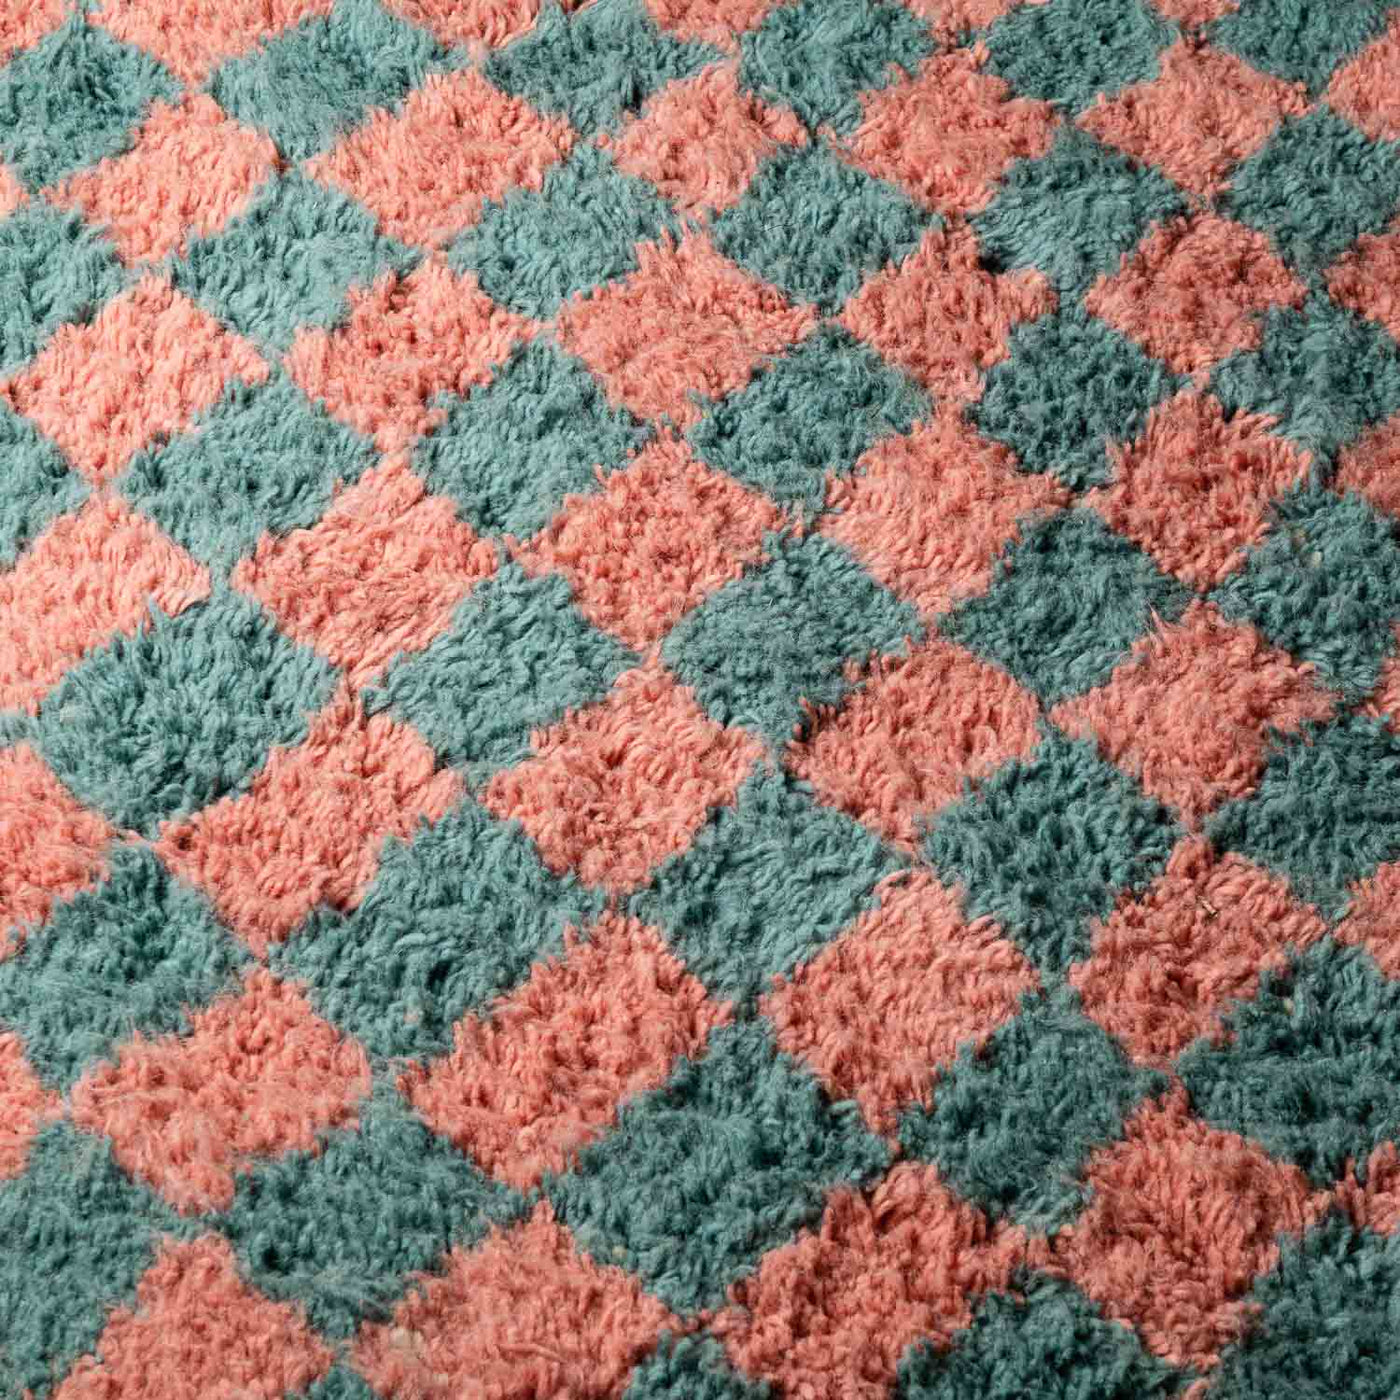 Checkered Rug Teal and Pink Wool Beni Ourain Moroccan Rug pastel colours - Authentic Moroccan